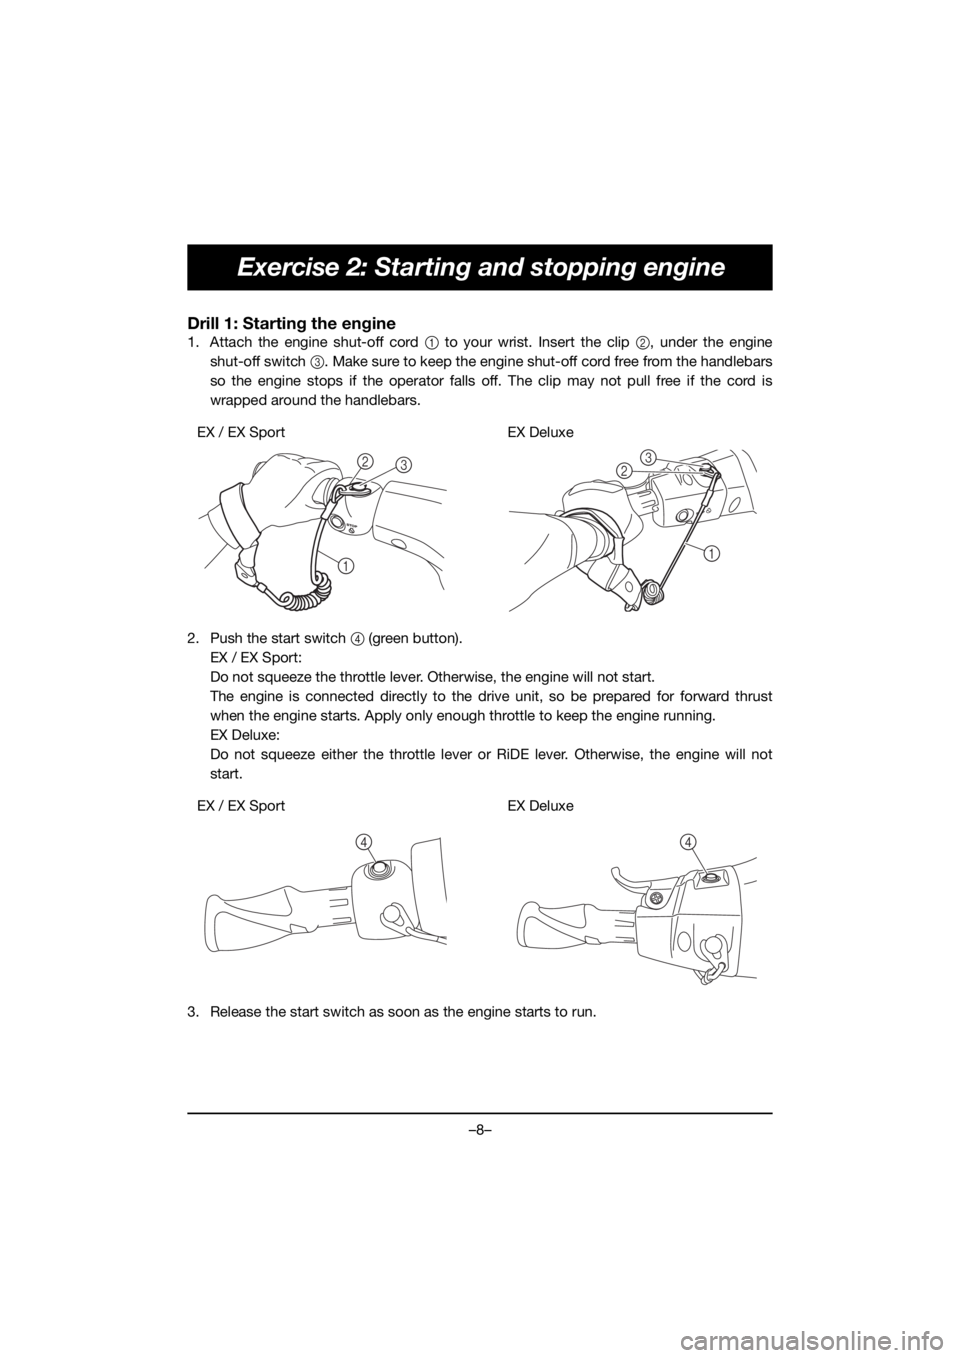 YAMAHA EX DELUXE 2019  Bruksanvisningar (in Swedish) –8–
Exercise 2: Starting and stopping engine
Drill 1: Starting the engine
1. Attach the engine shut-off cord 1 to your wrist. Insert the clip 2, under the engine
shut-off switch 3. Make sure to ke